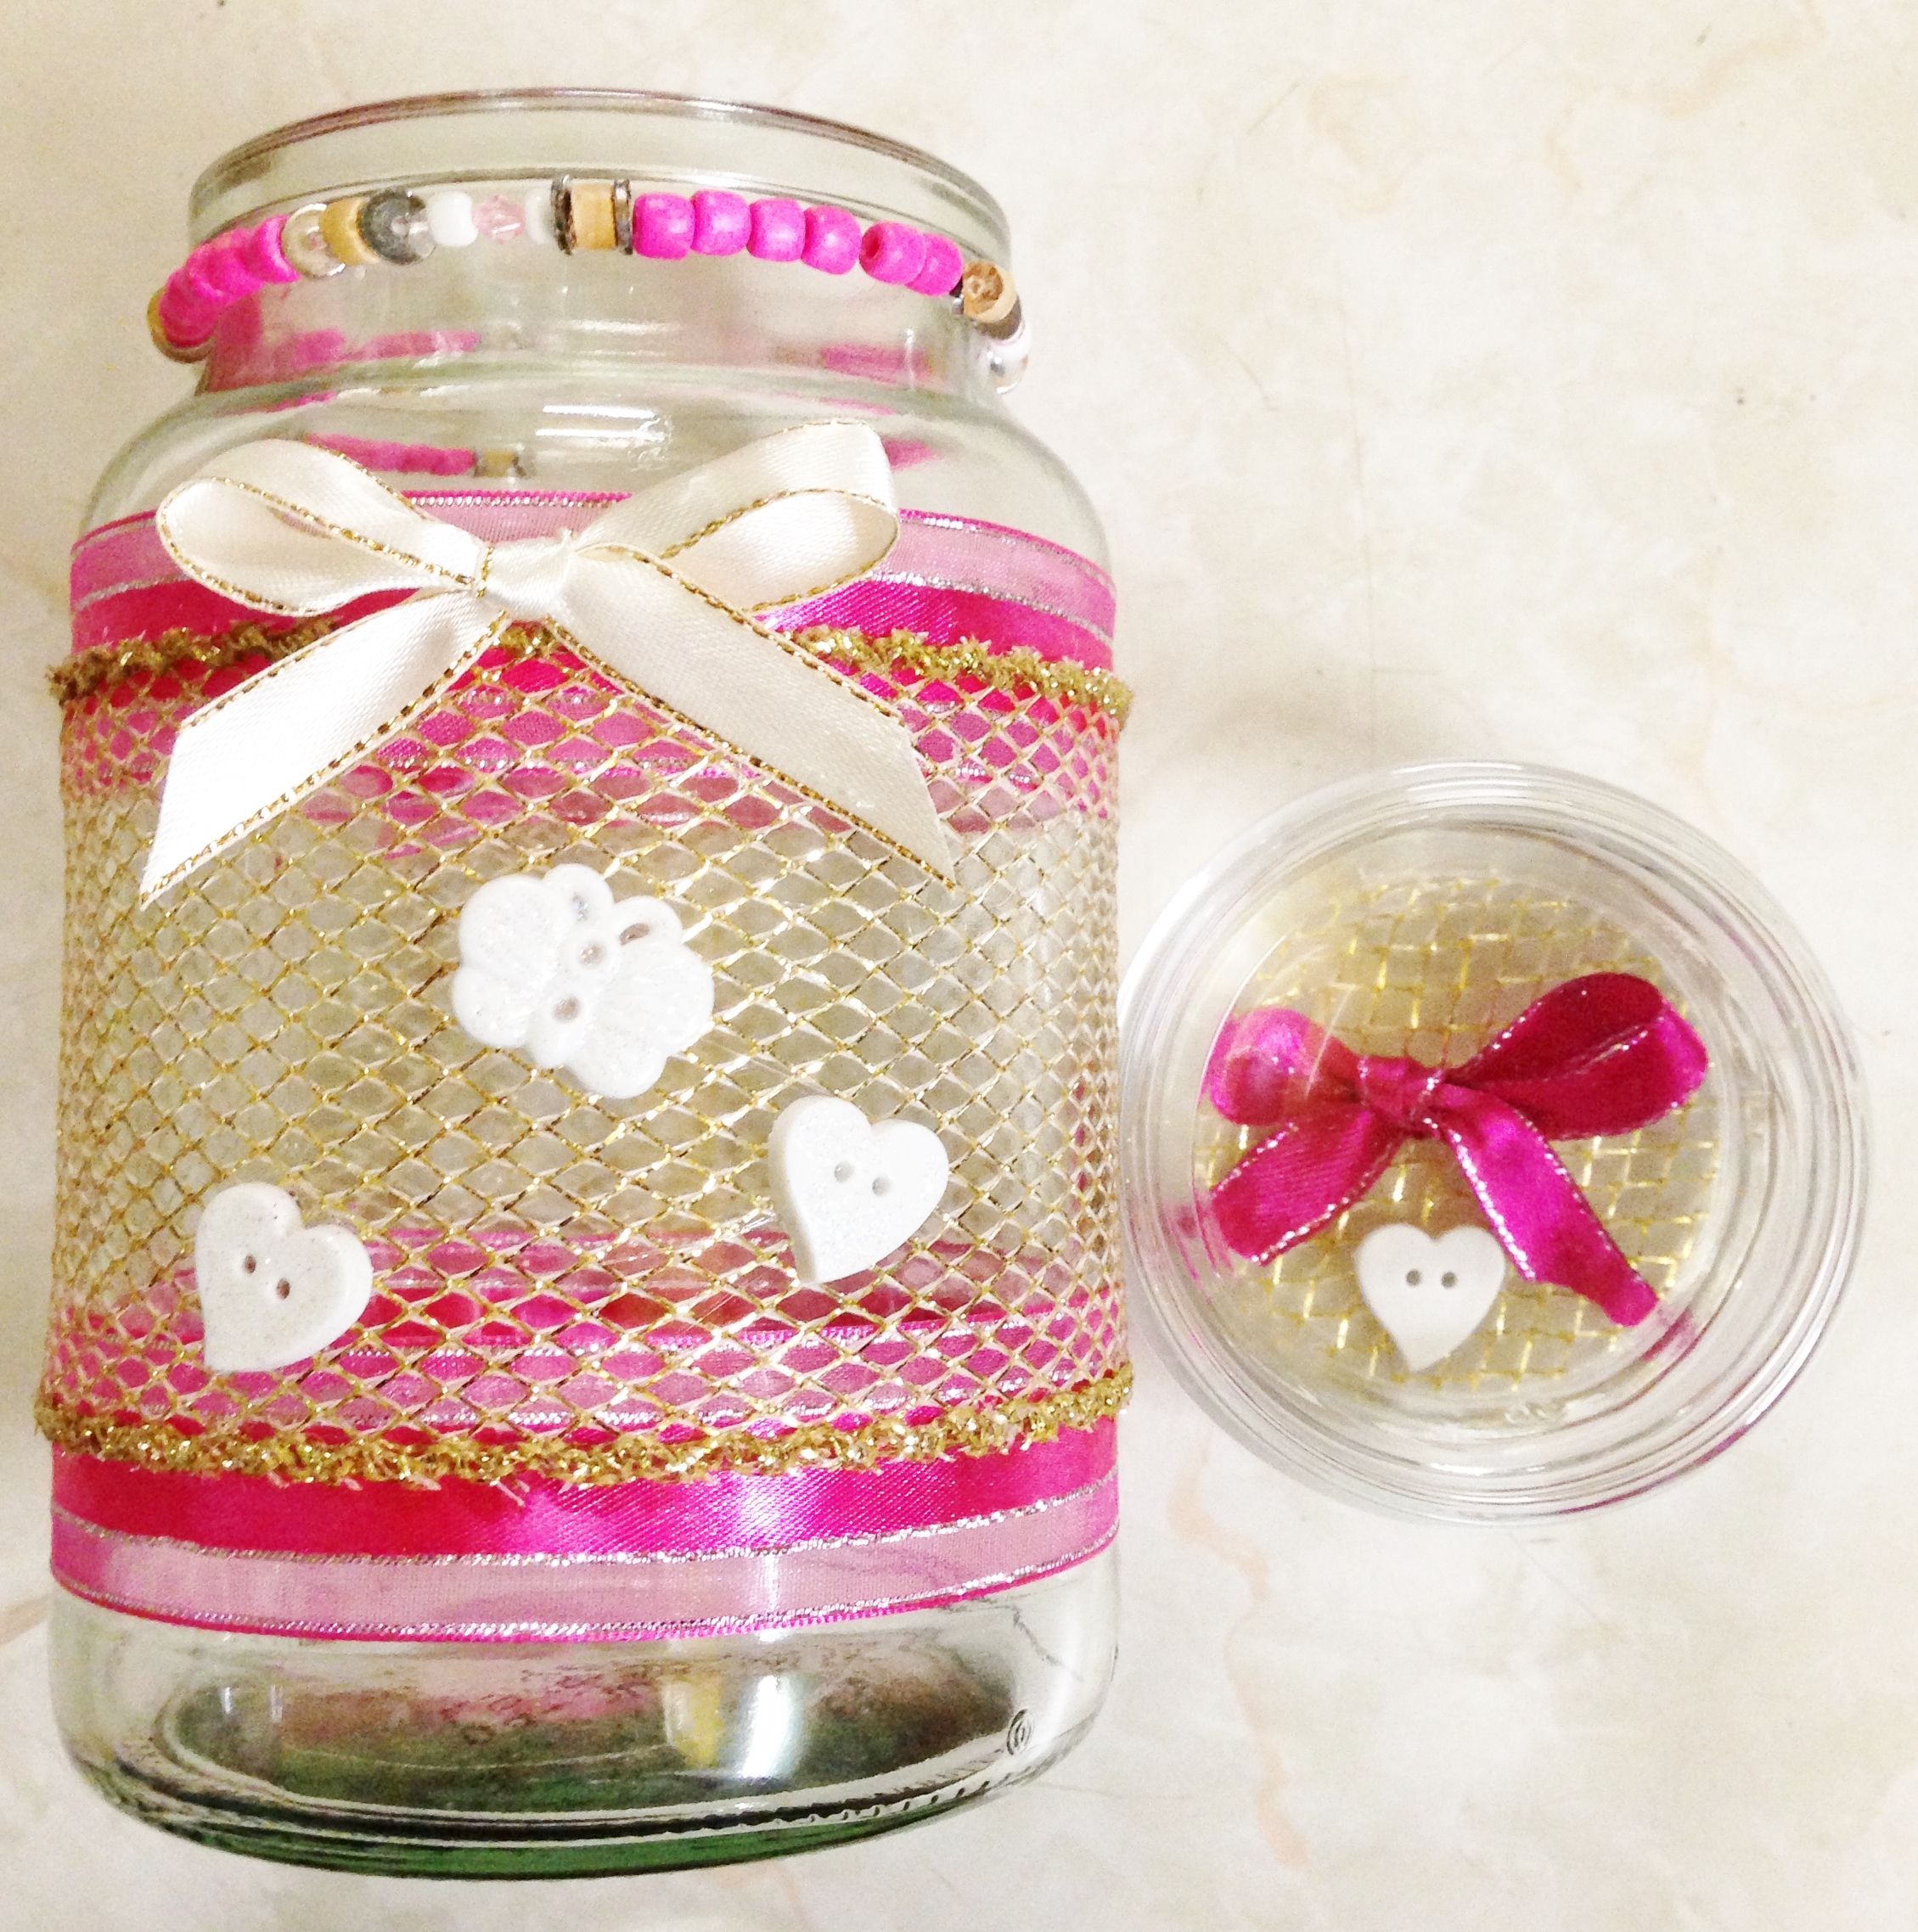 decorated moccona coffee jar, ribbons, buttons, beads and clear ...